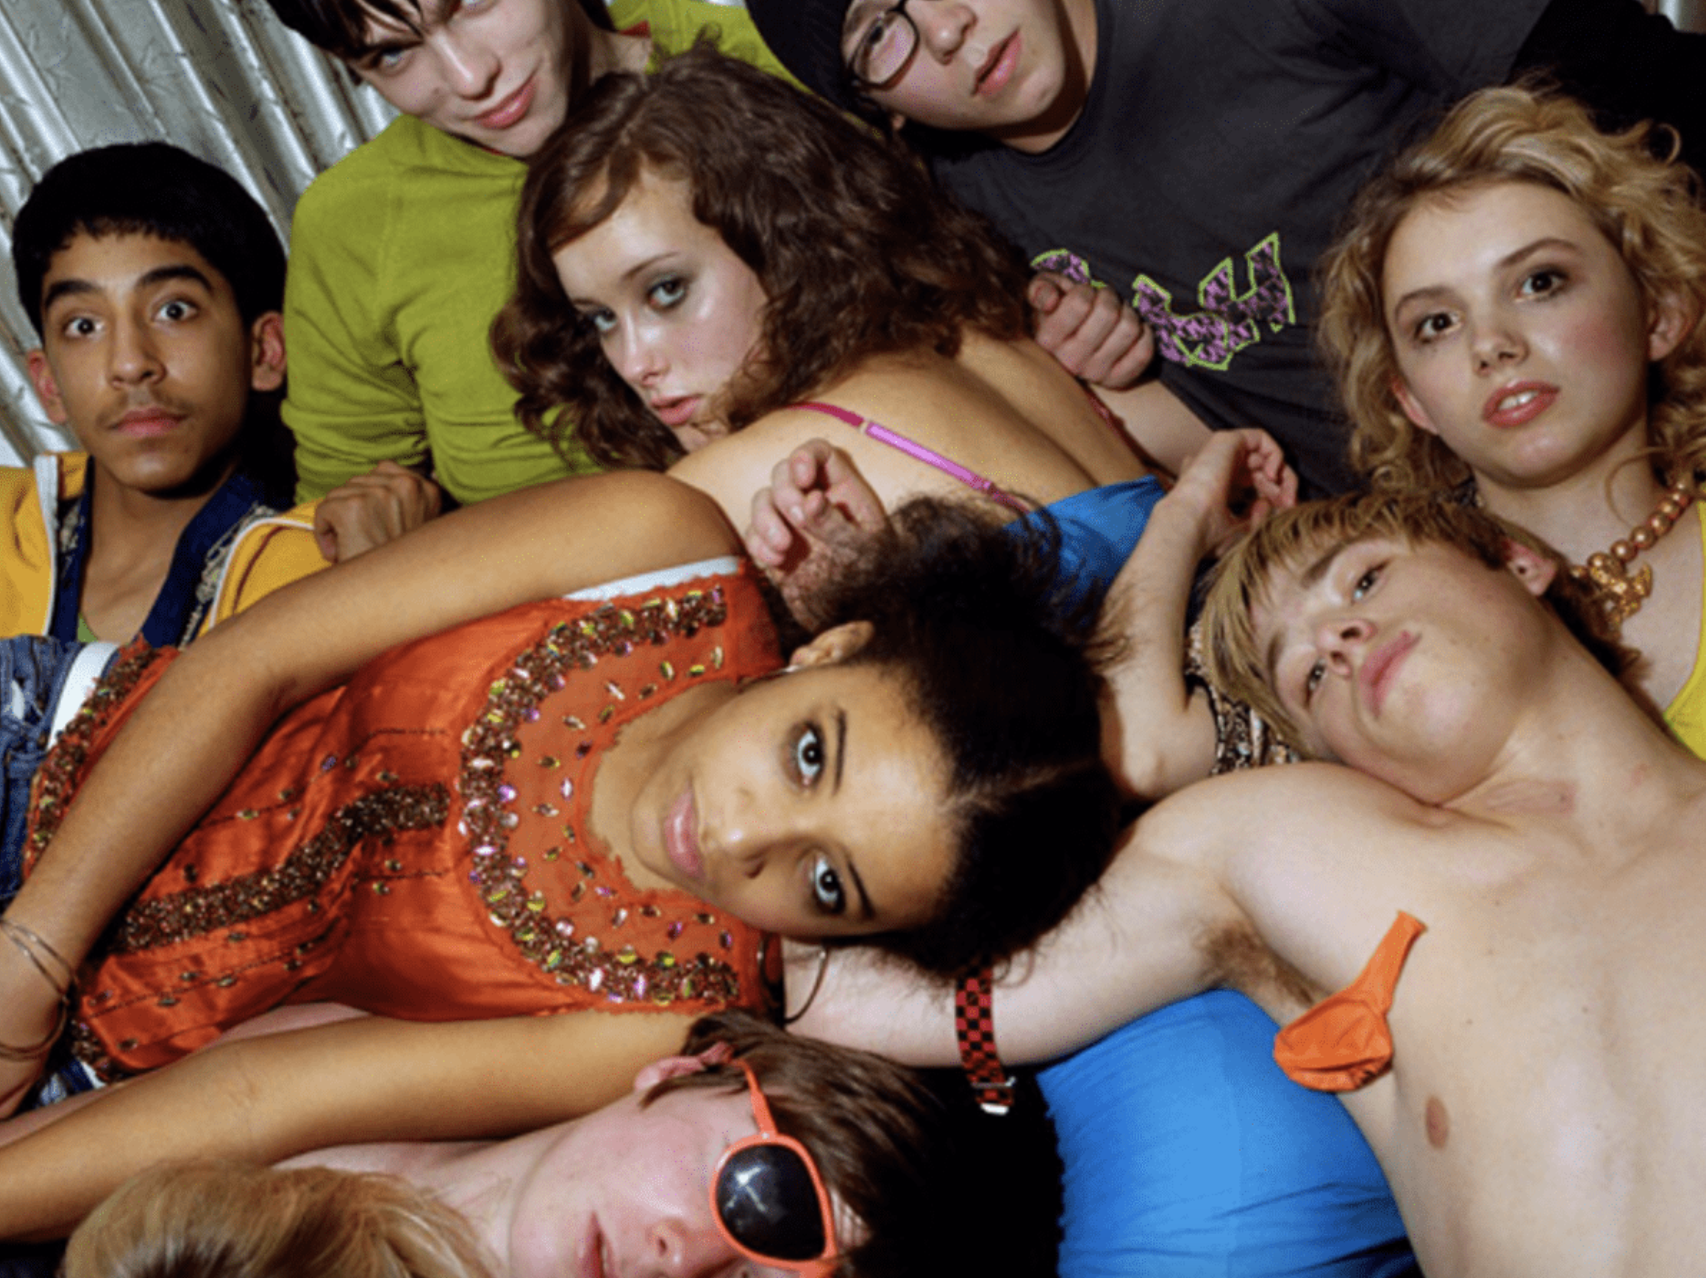 Skins” Has Once Again Been Exposed For Being Seriously Problematic pic